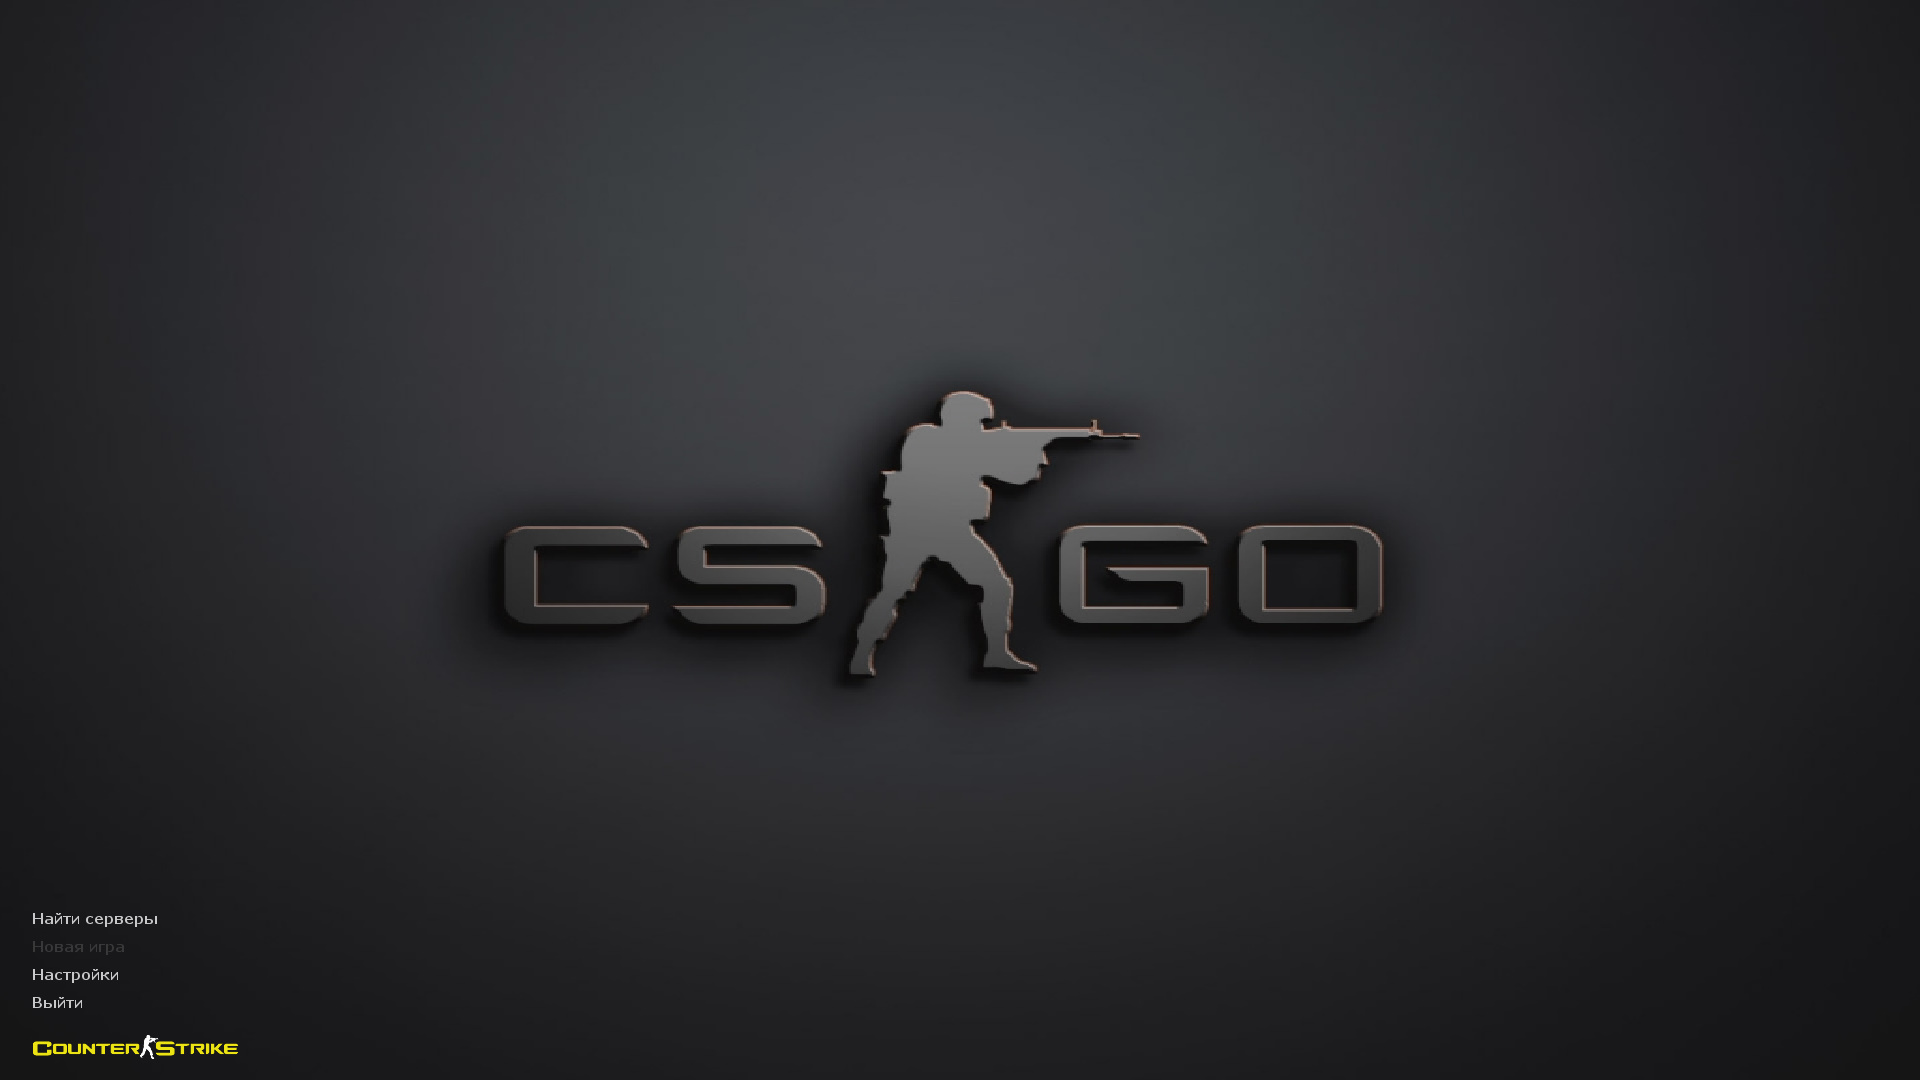 Counter-Strike 1.6 Global Offensive